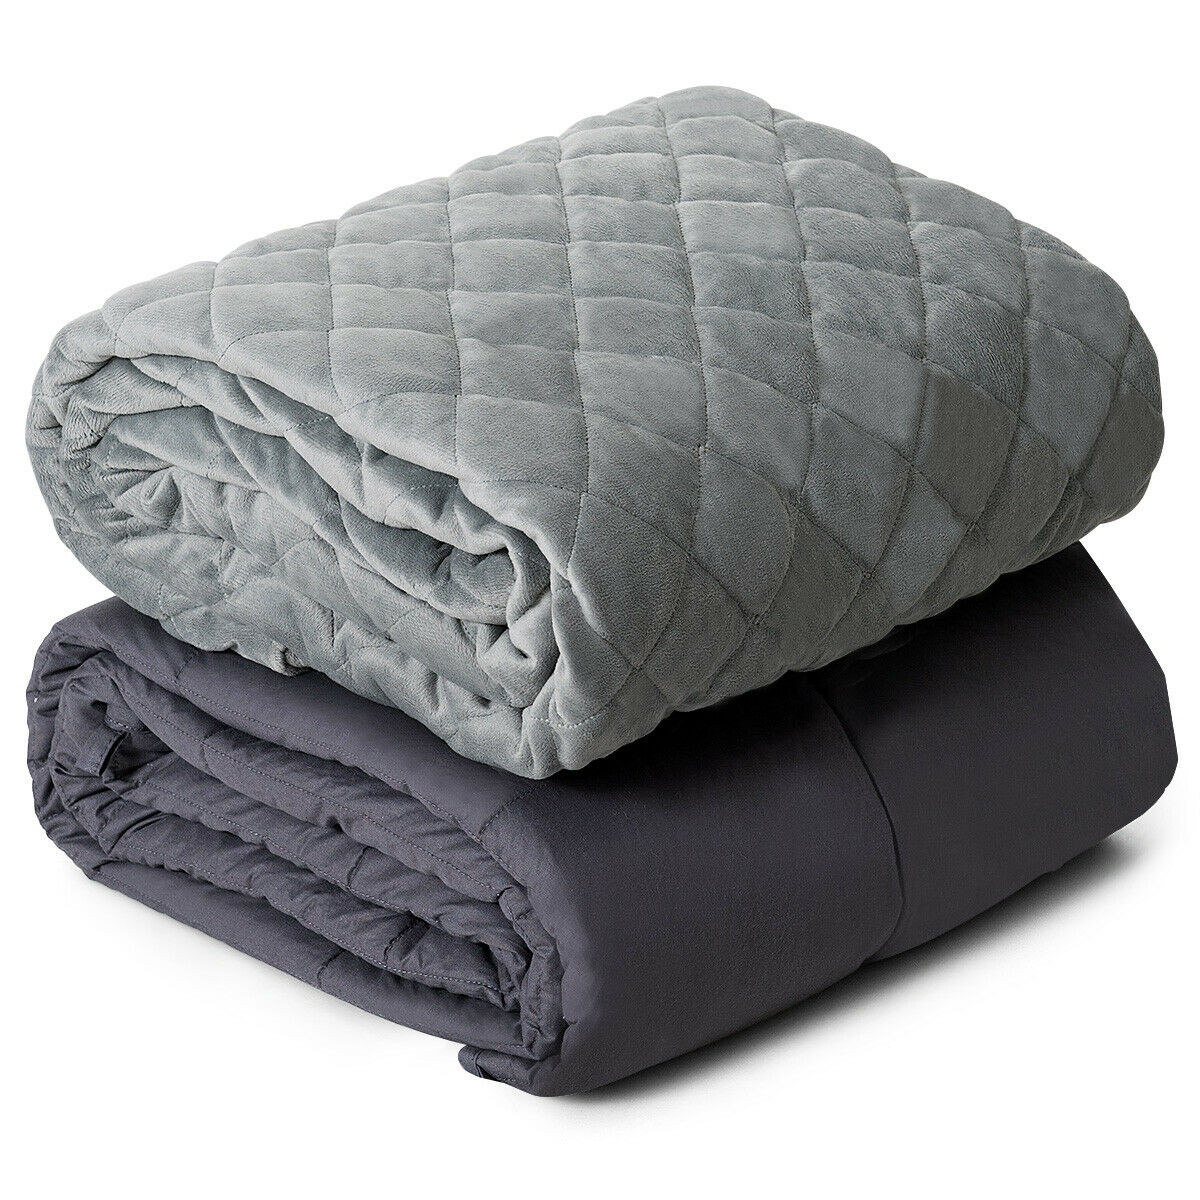 15 lbs 100 Percent Cotton Weighted Blanket With Soft Crystal Cover